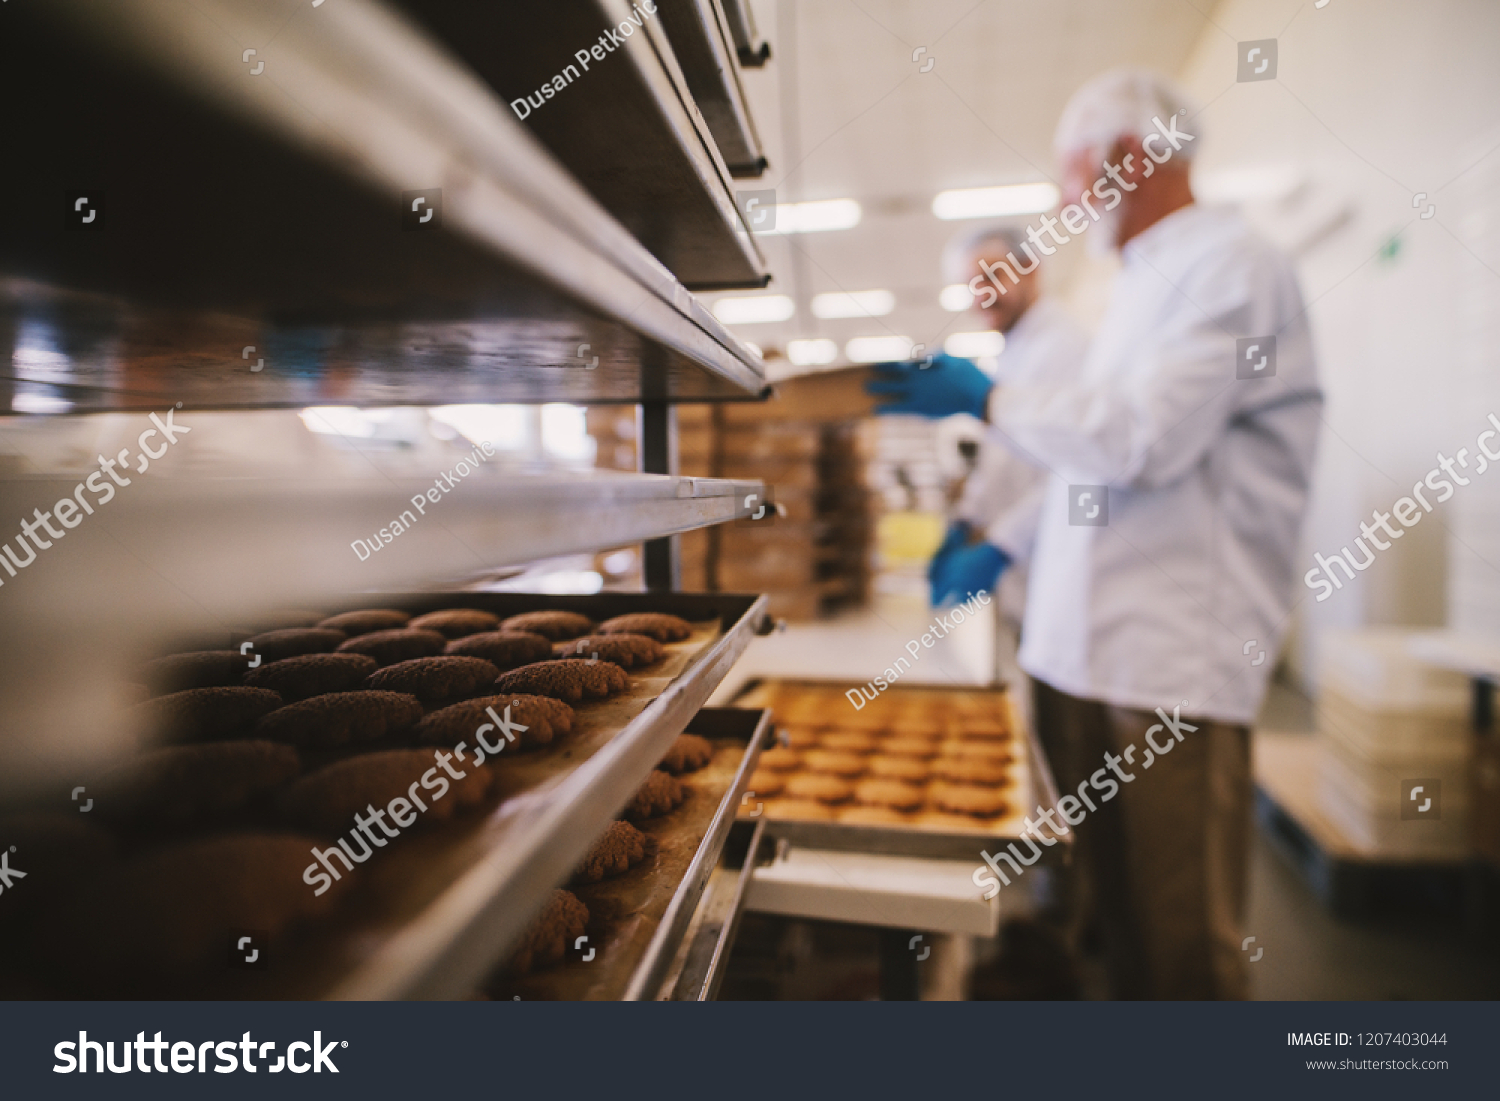 Close up of tray full of fresh baked cookies in food factory. Blurred picture of two male employees in sterile clothes in background. #1207403044